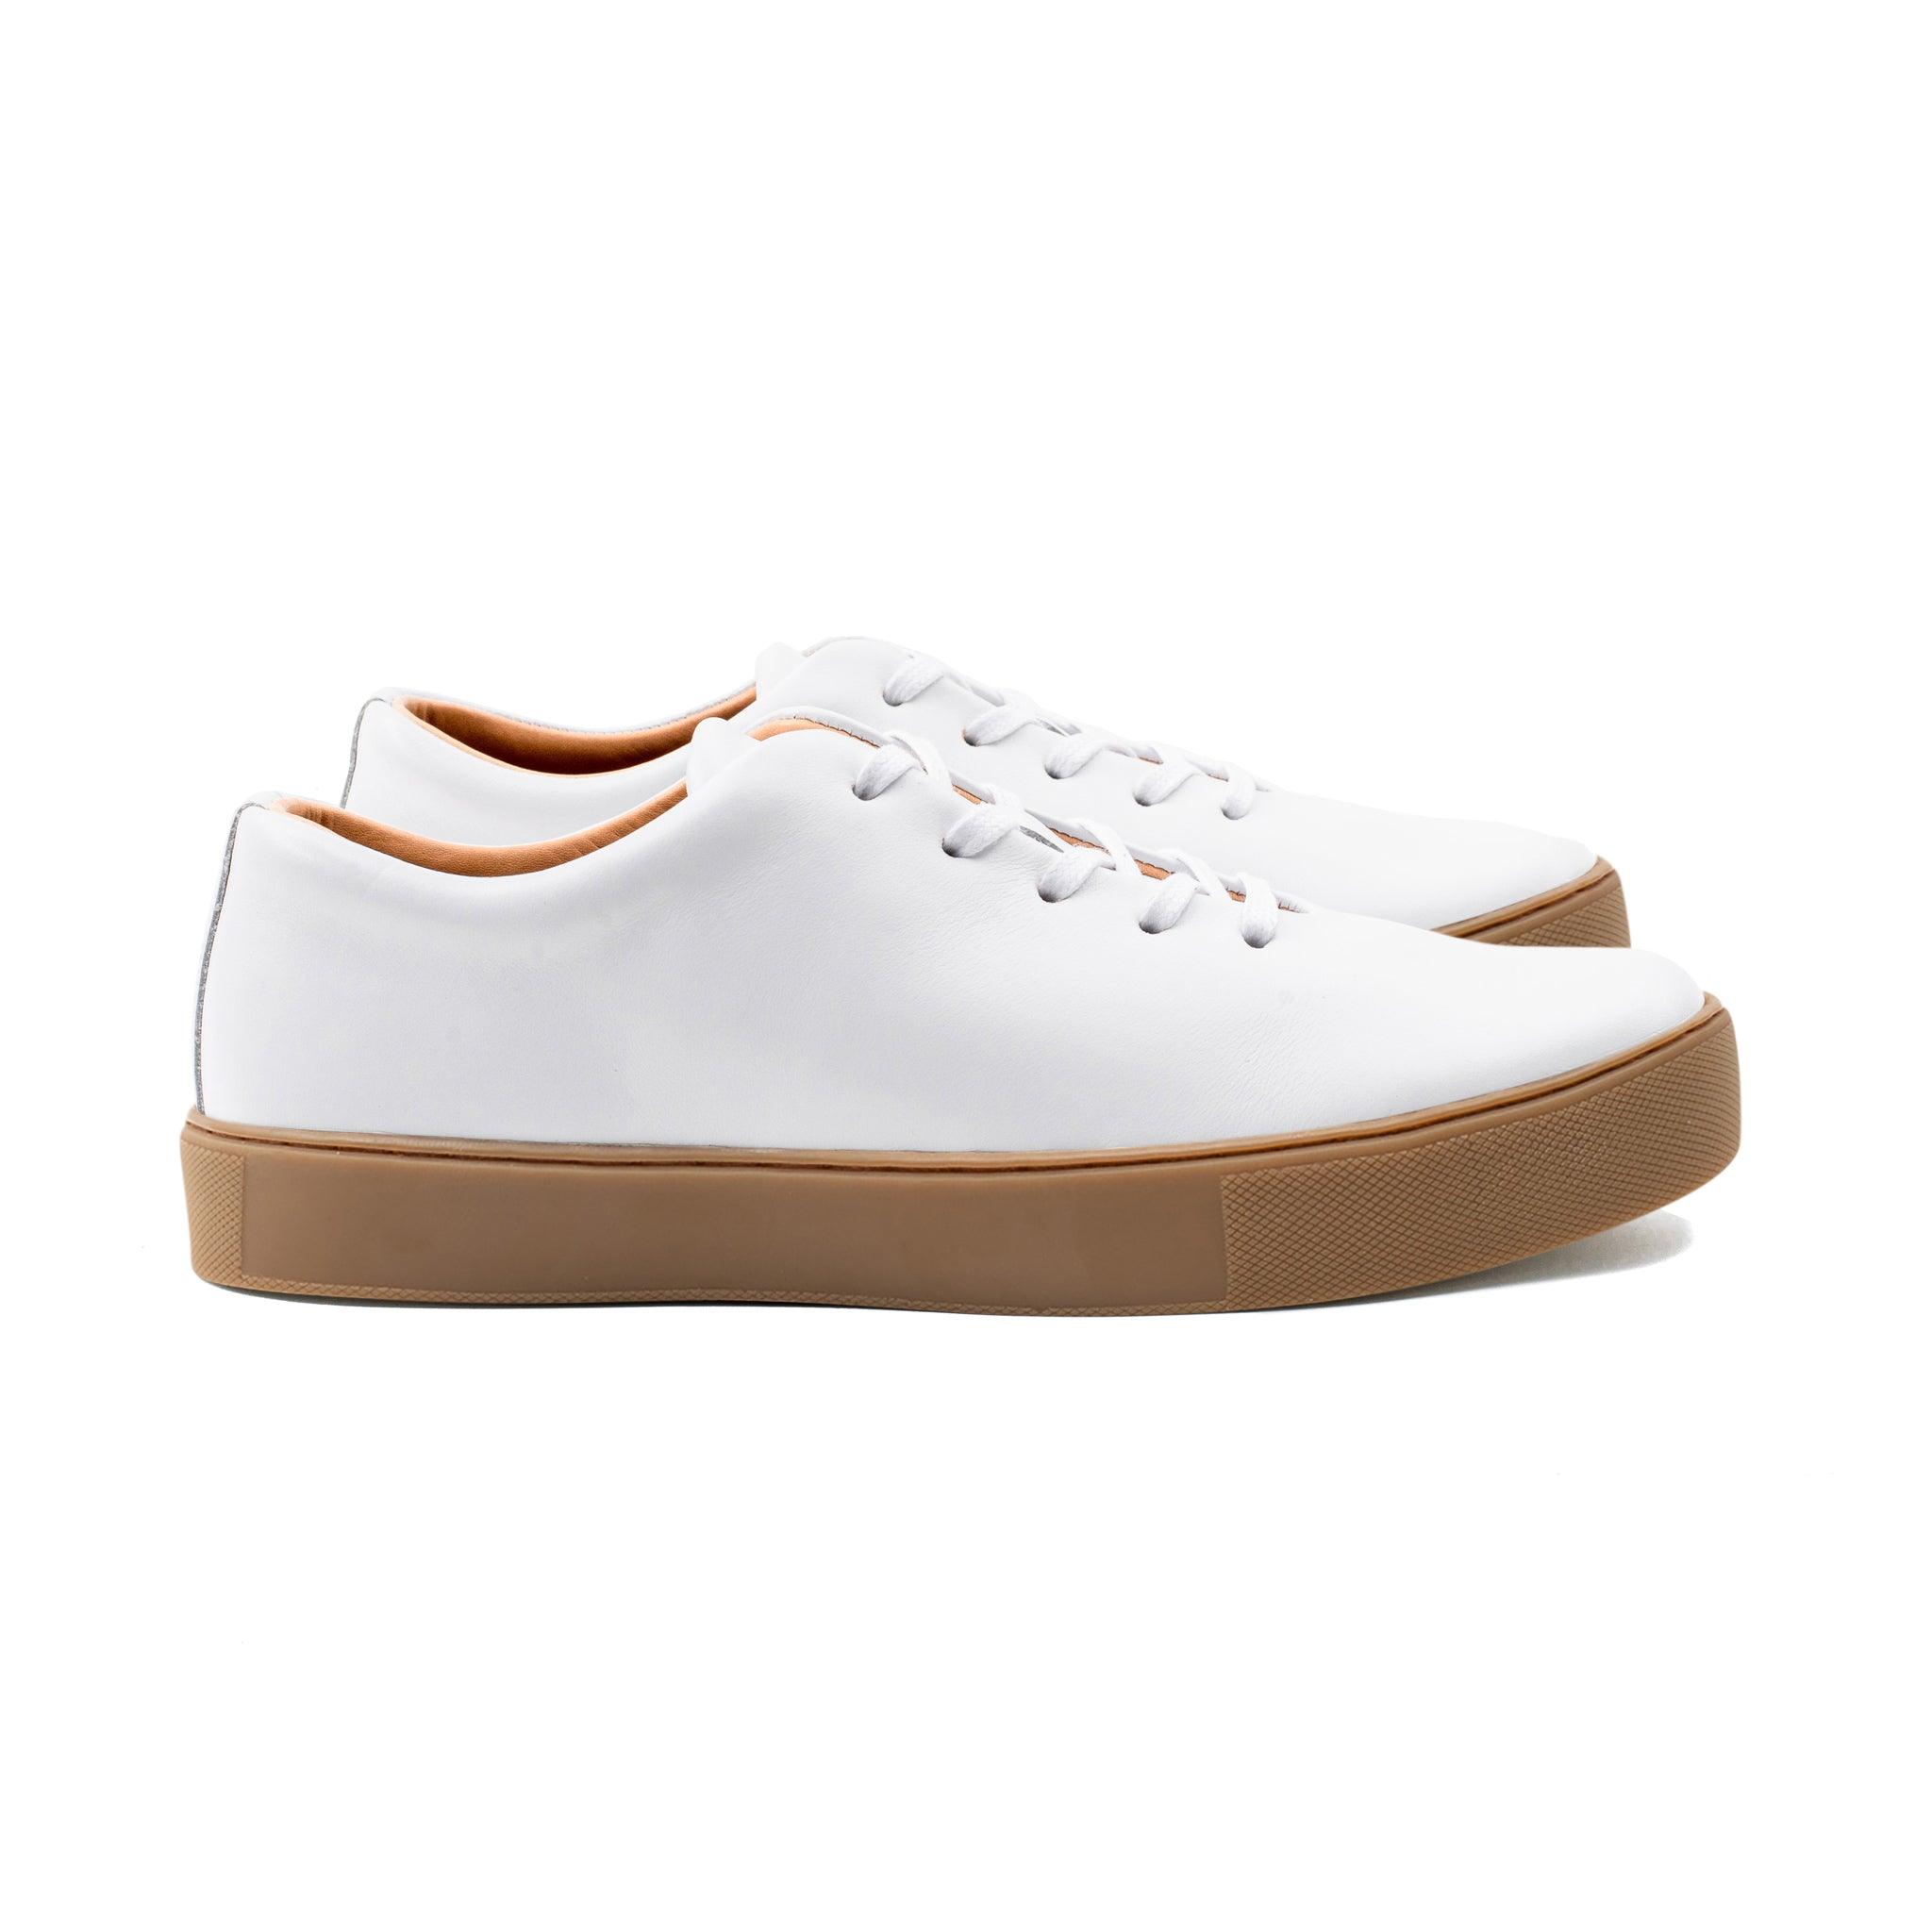 white leather sneakers gum sole